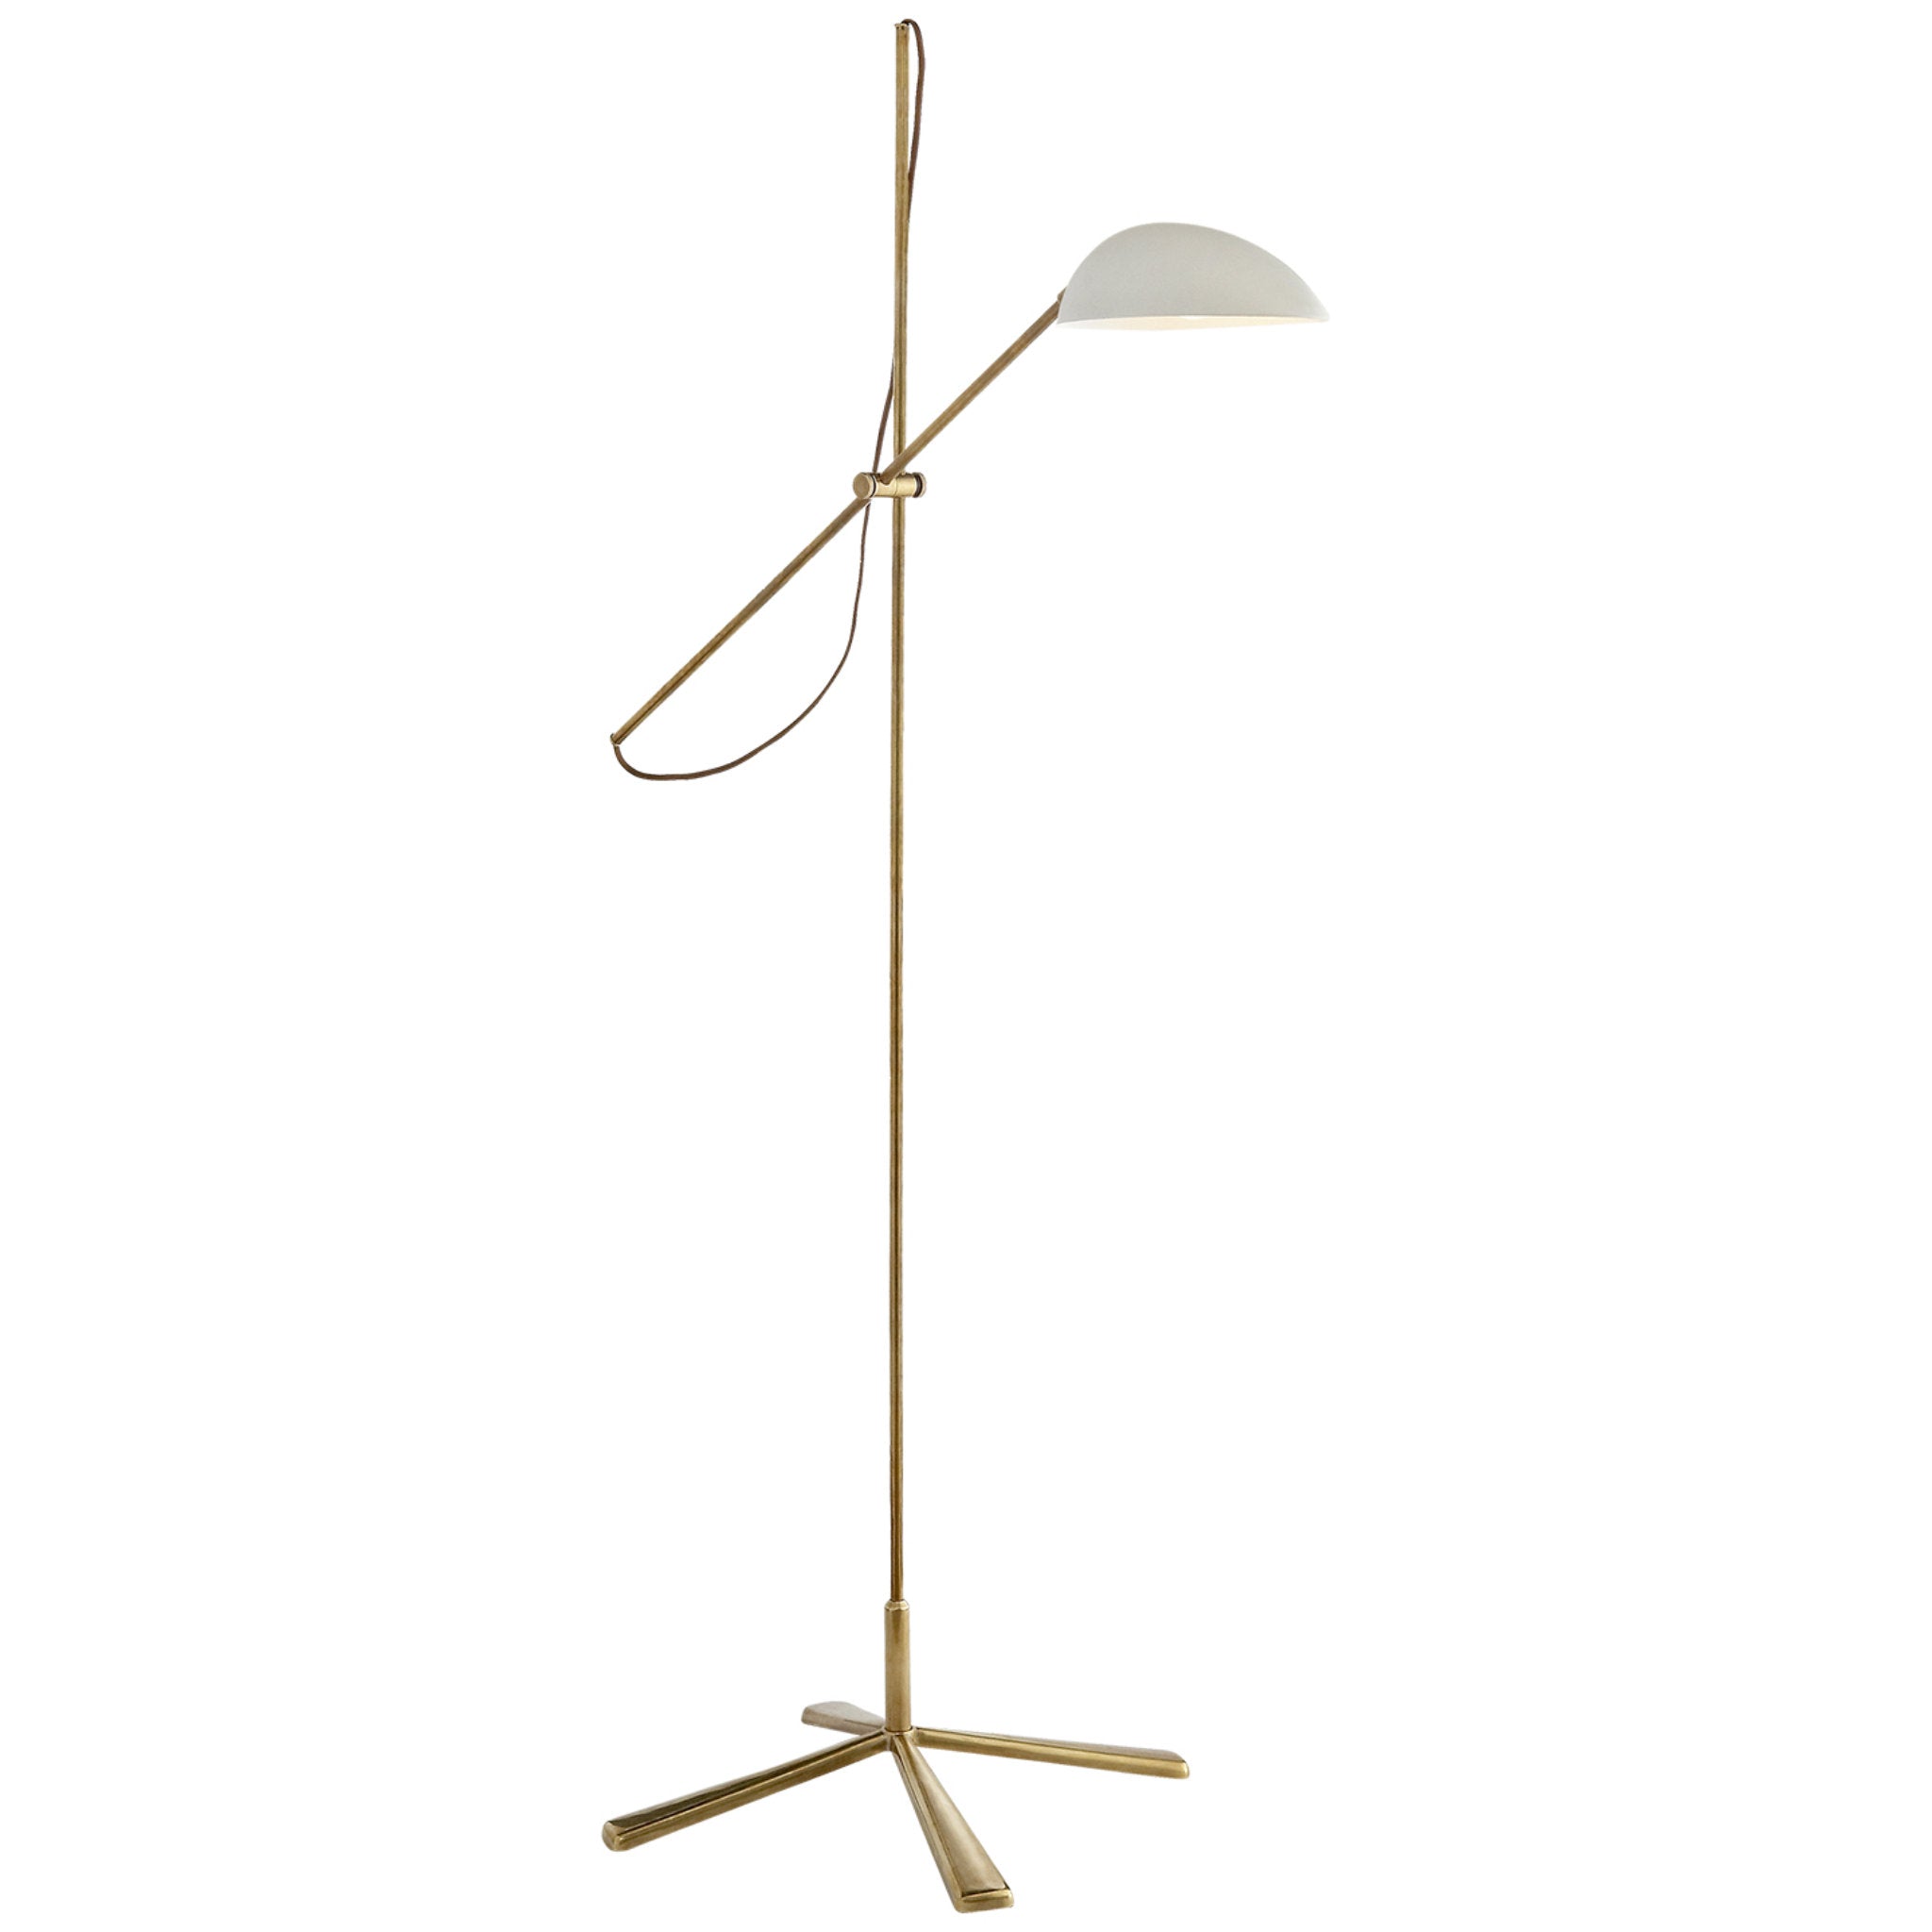 AERIN Graphic Floor Lamp in Hand-Rubbed Antique Brass with White